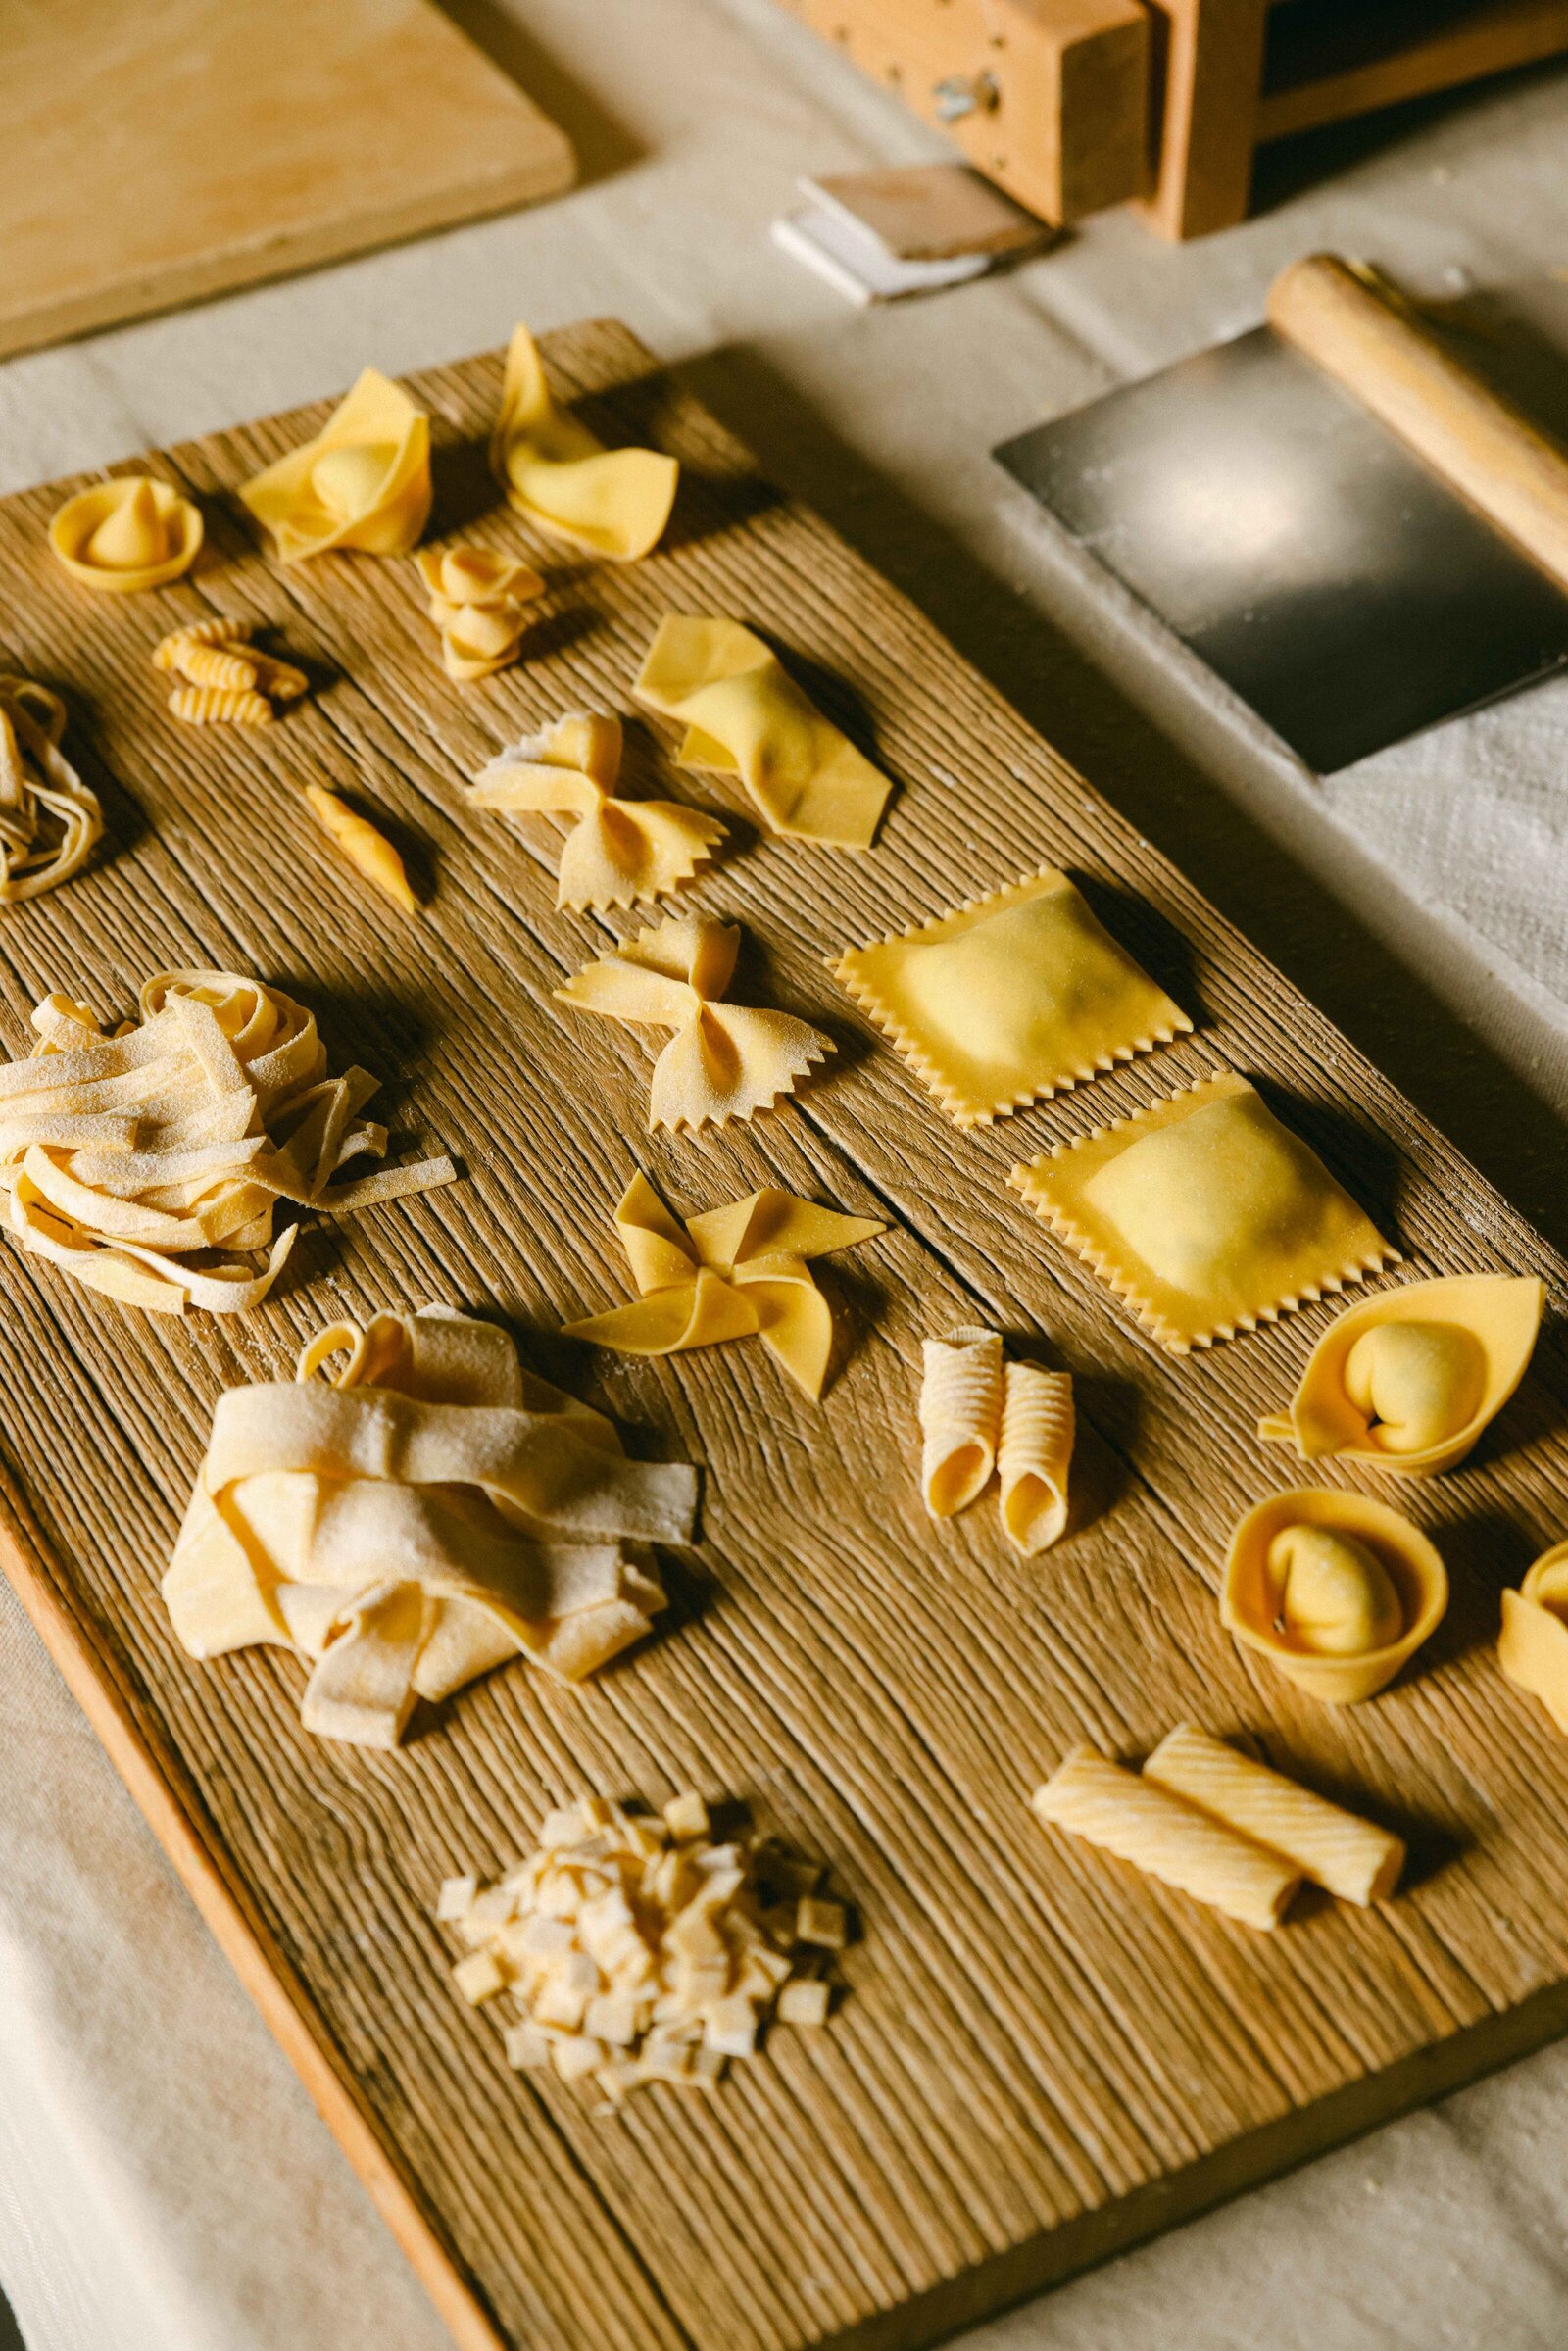 LovexFood Florence airbnb class pasta noodles different shapes ravioli